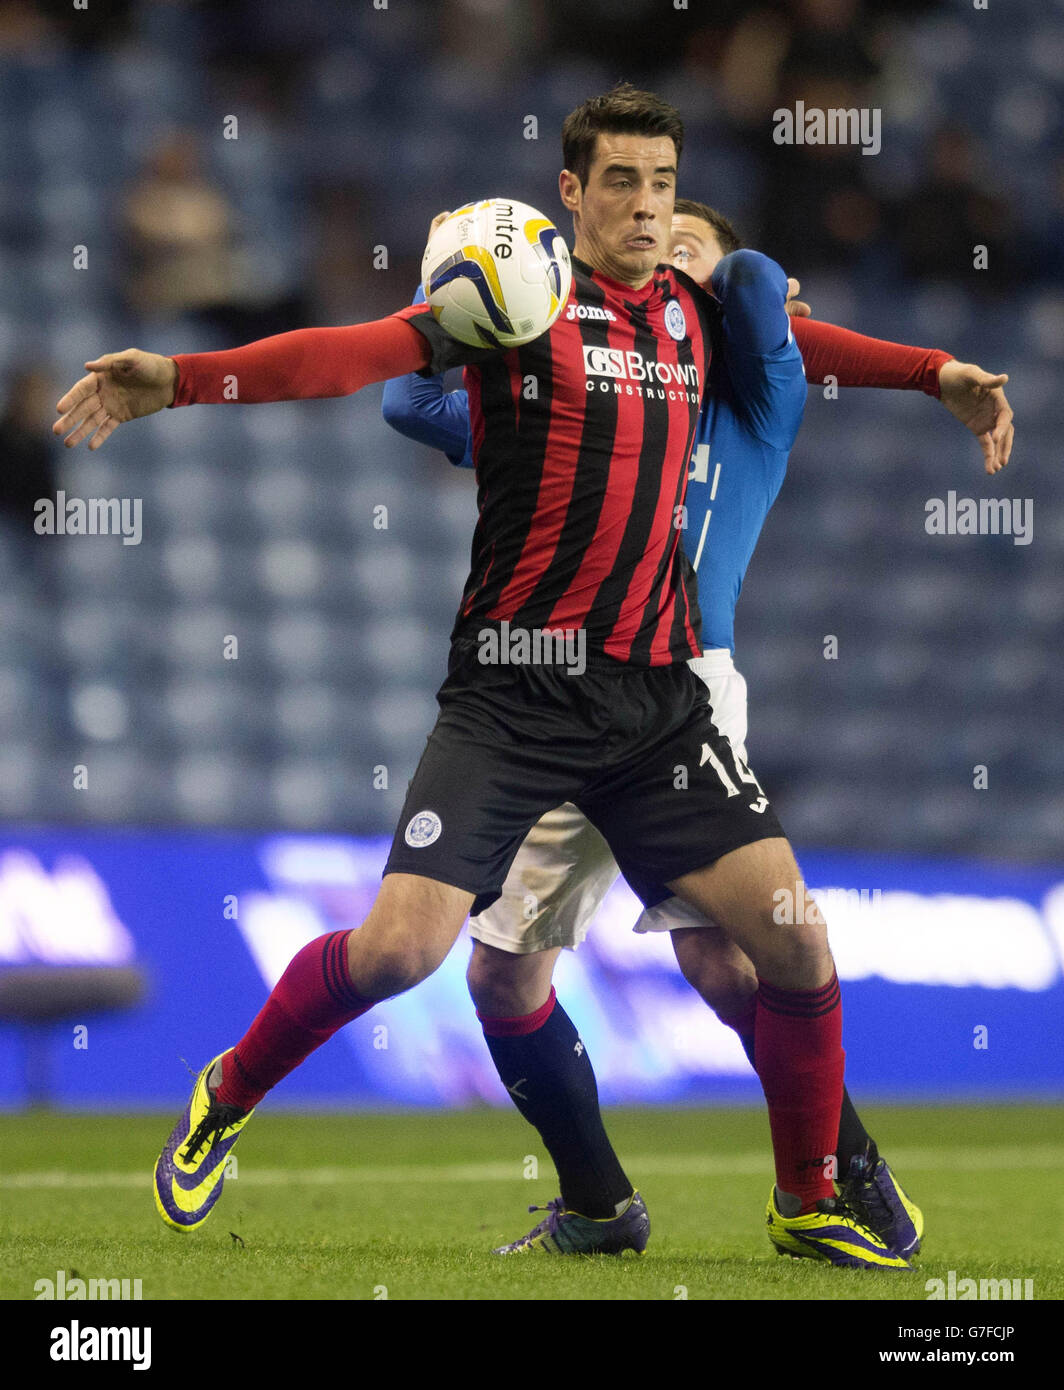 St Johnstone's Brian Graham during the Scottish League Cup Quarter Final match at Ibrox Stadium, Glasgow. Stock Photo